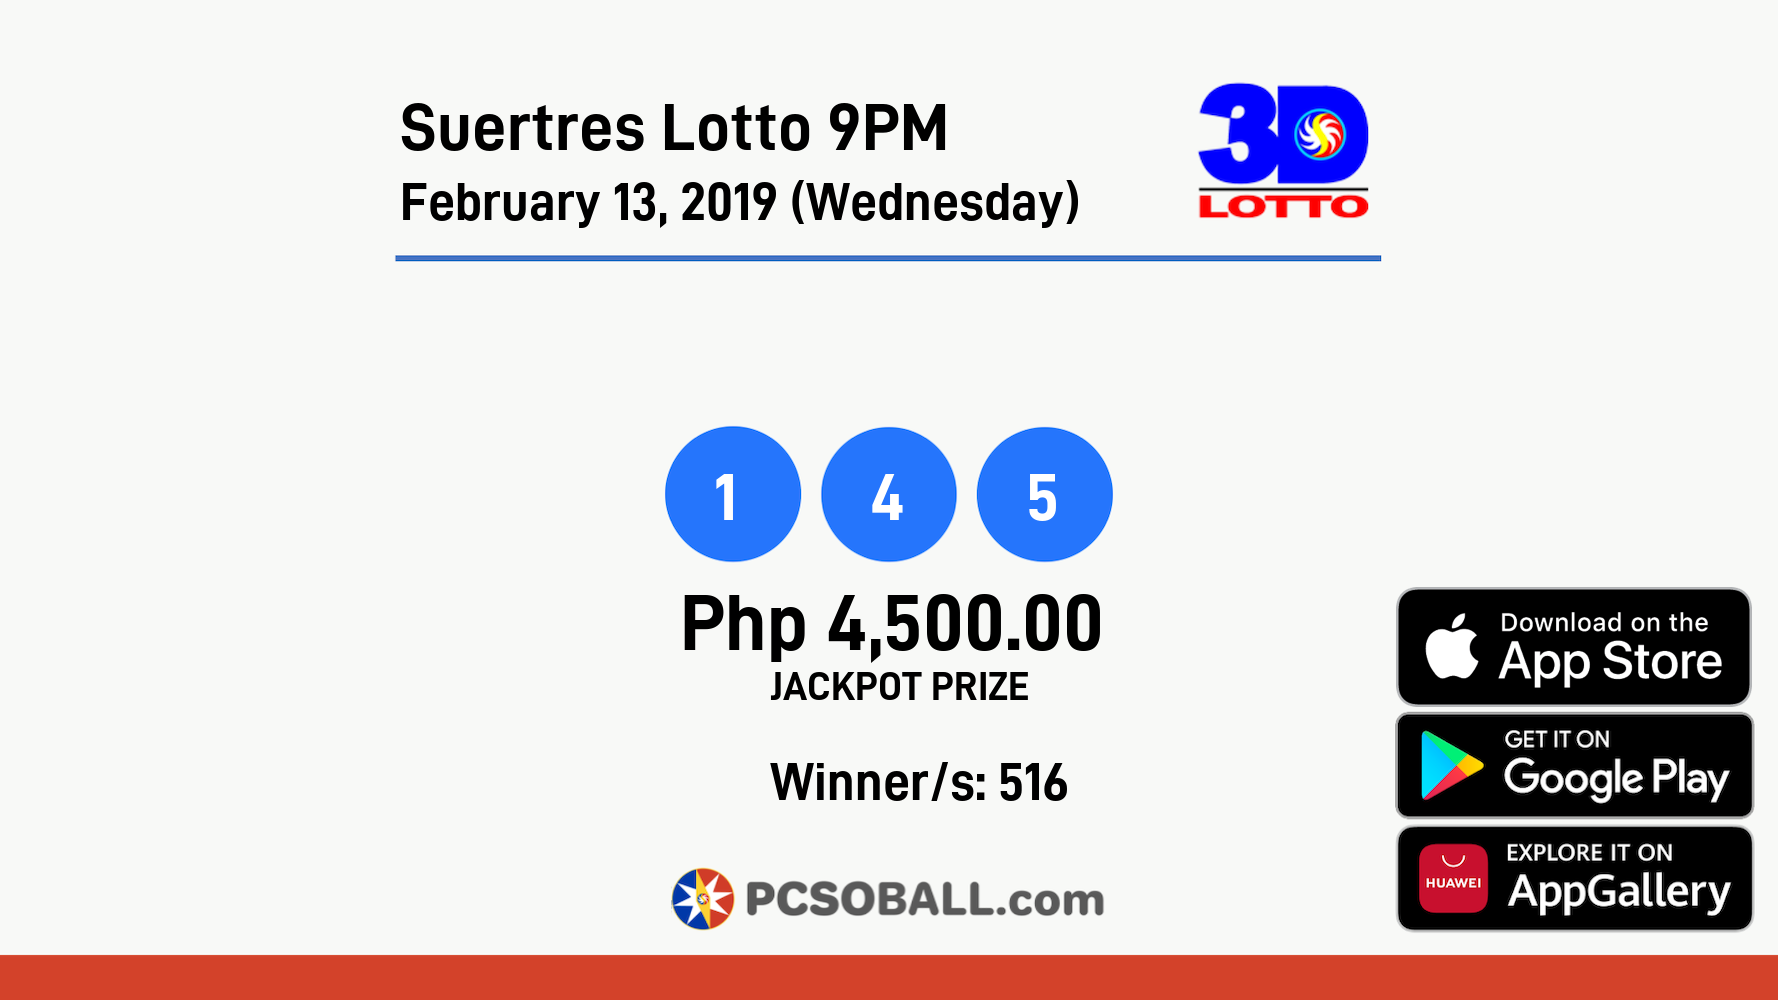 Suertres Lotto 9PM February 13, 2019 (Wednesday) Result